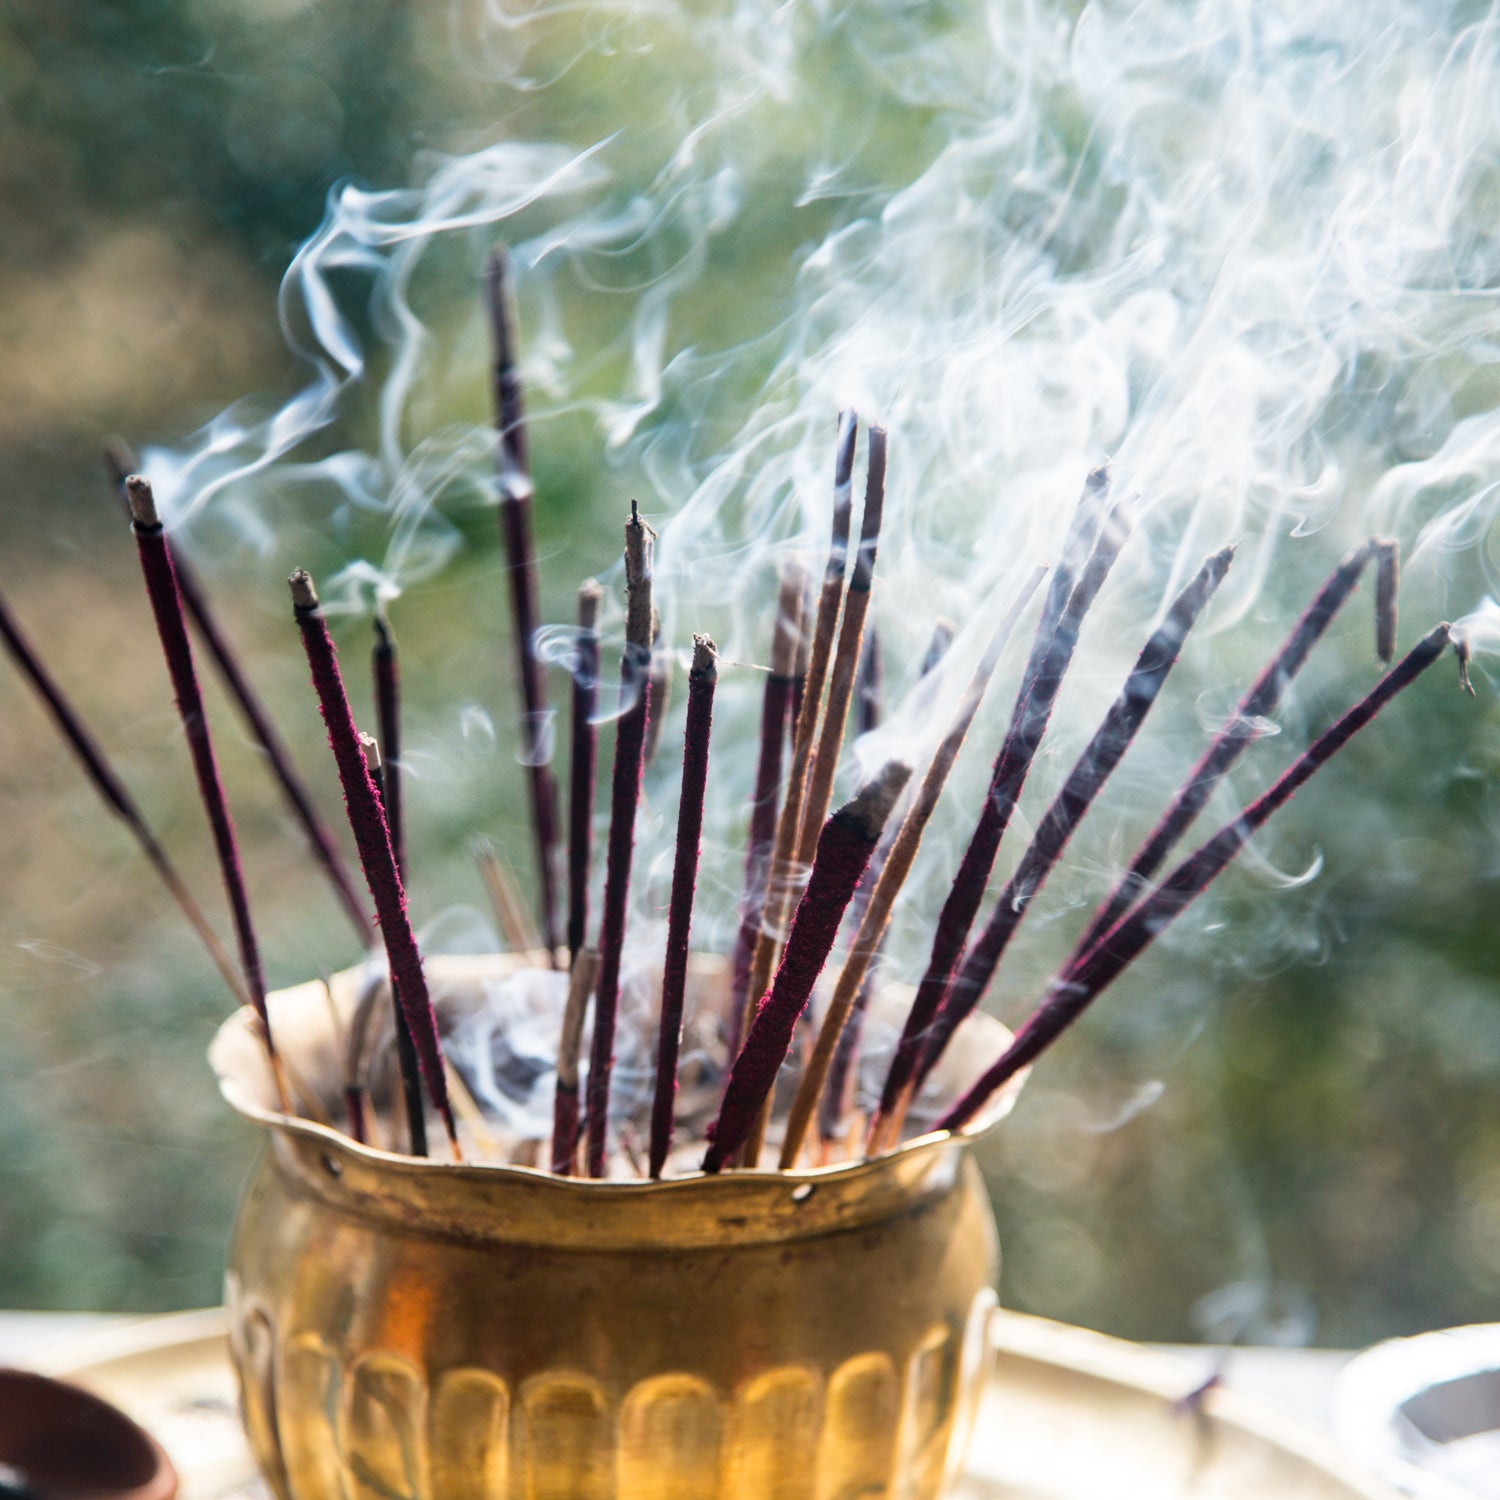 A photo of sandalwood incense being burned. This scent is on of the primary note in the "Tea Tree and Sandalwood" scented candle from Tuscany Candle.